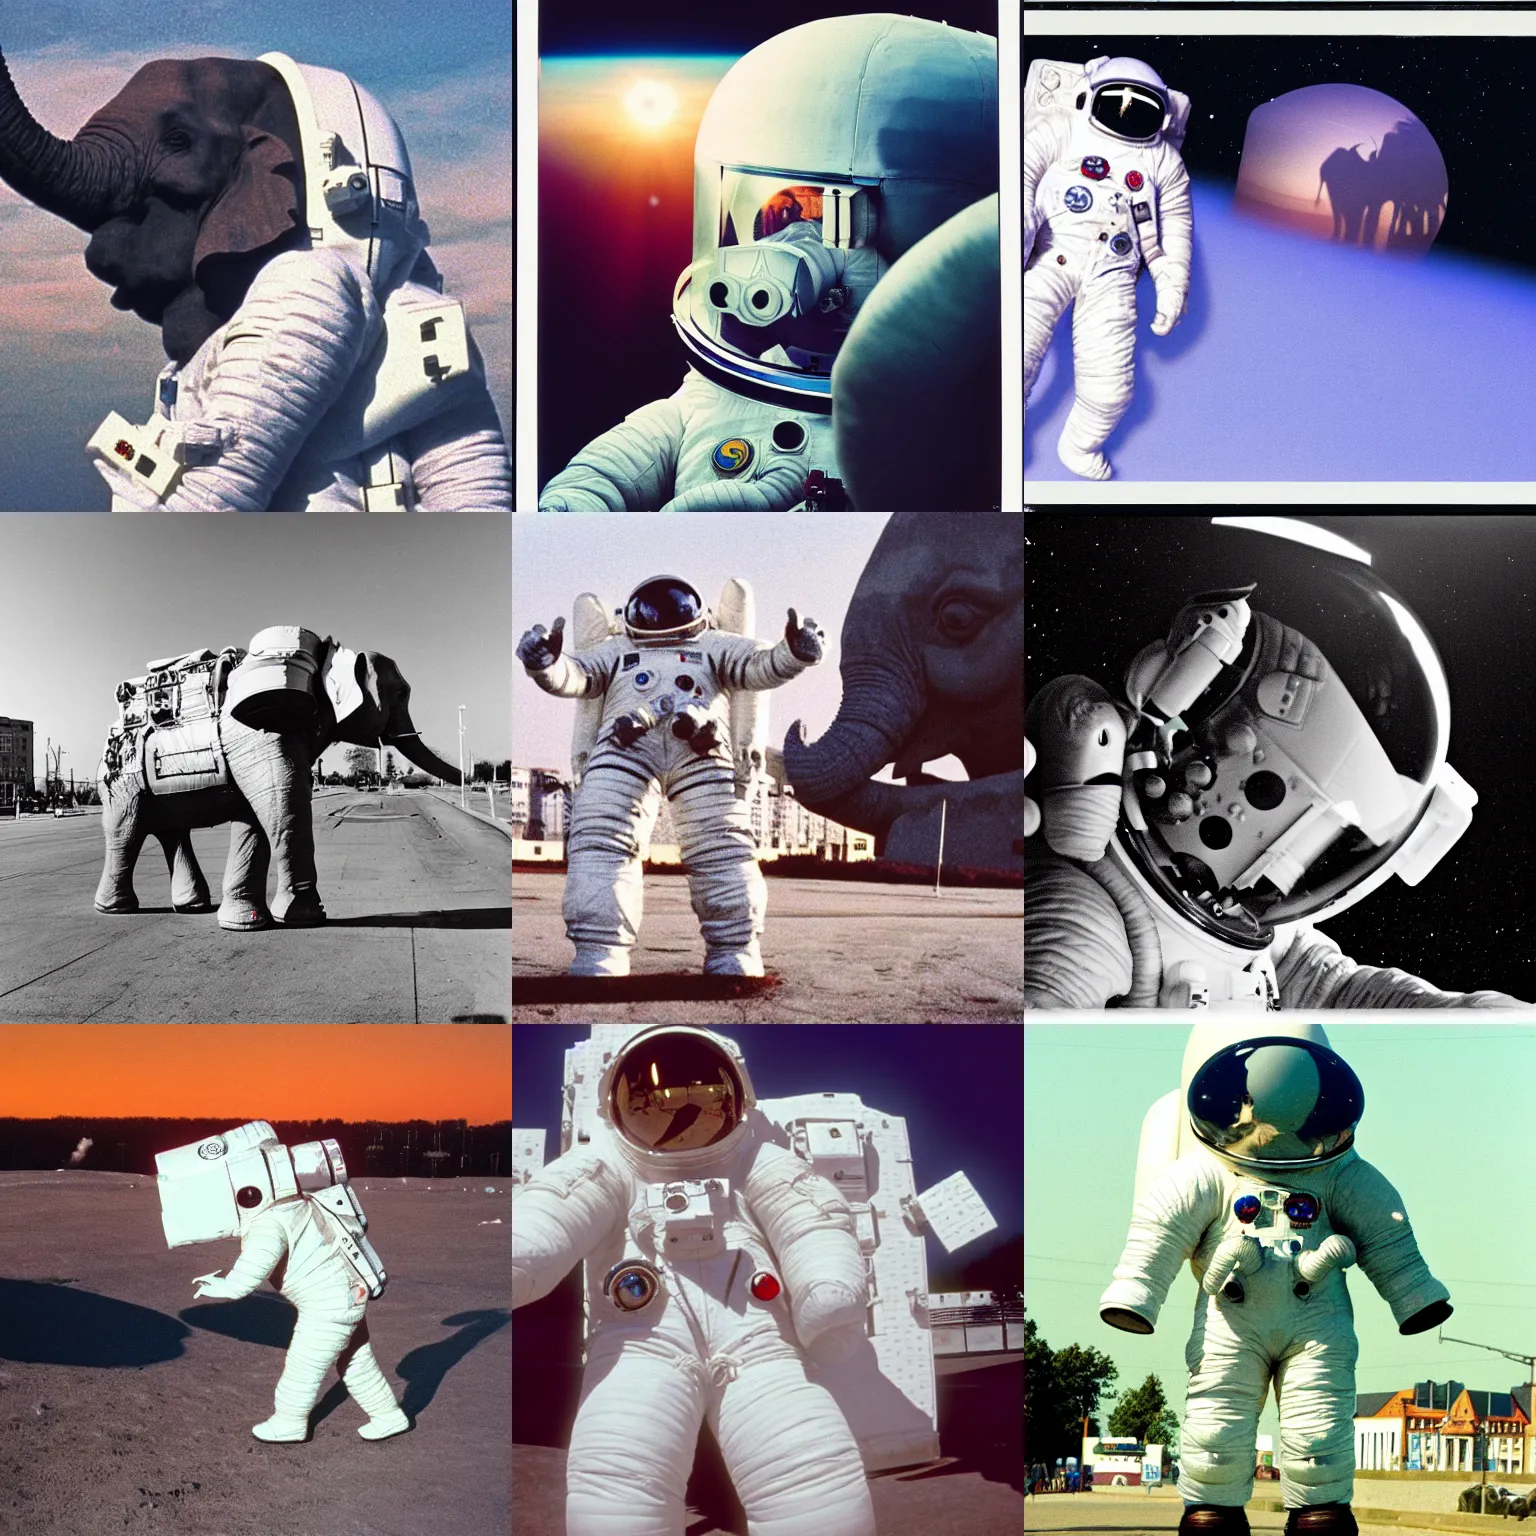 Prompt: 8 mm film still, giant elephant wearing white custom made american spacesuit with oversized giant helmet as astronaut animal, in legnica, sunrise, by vhs camcoder